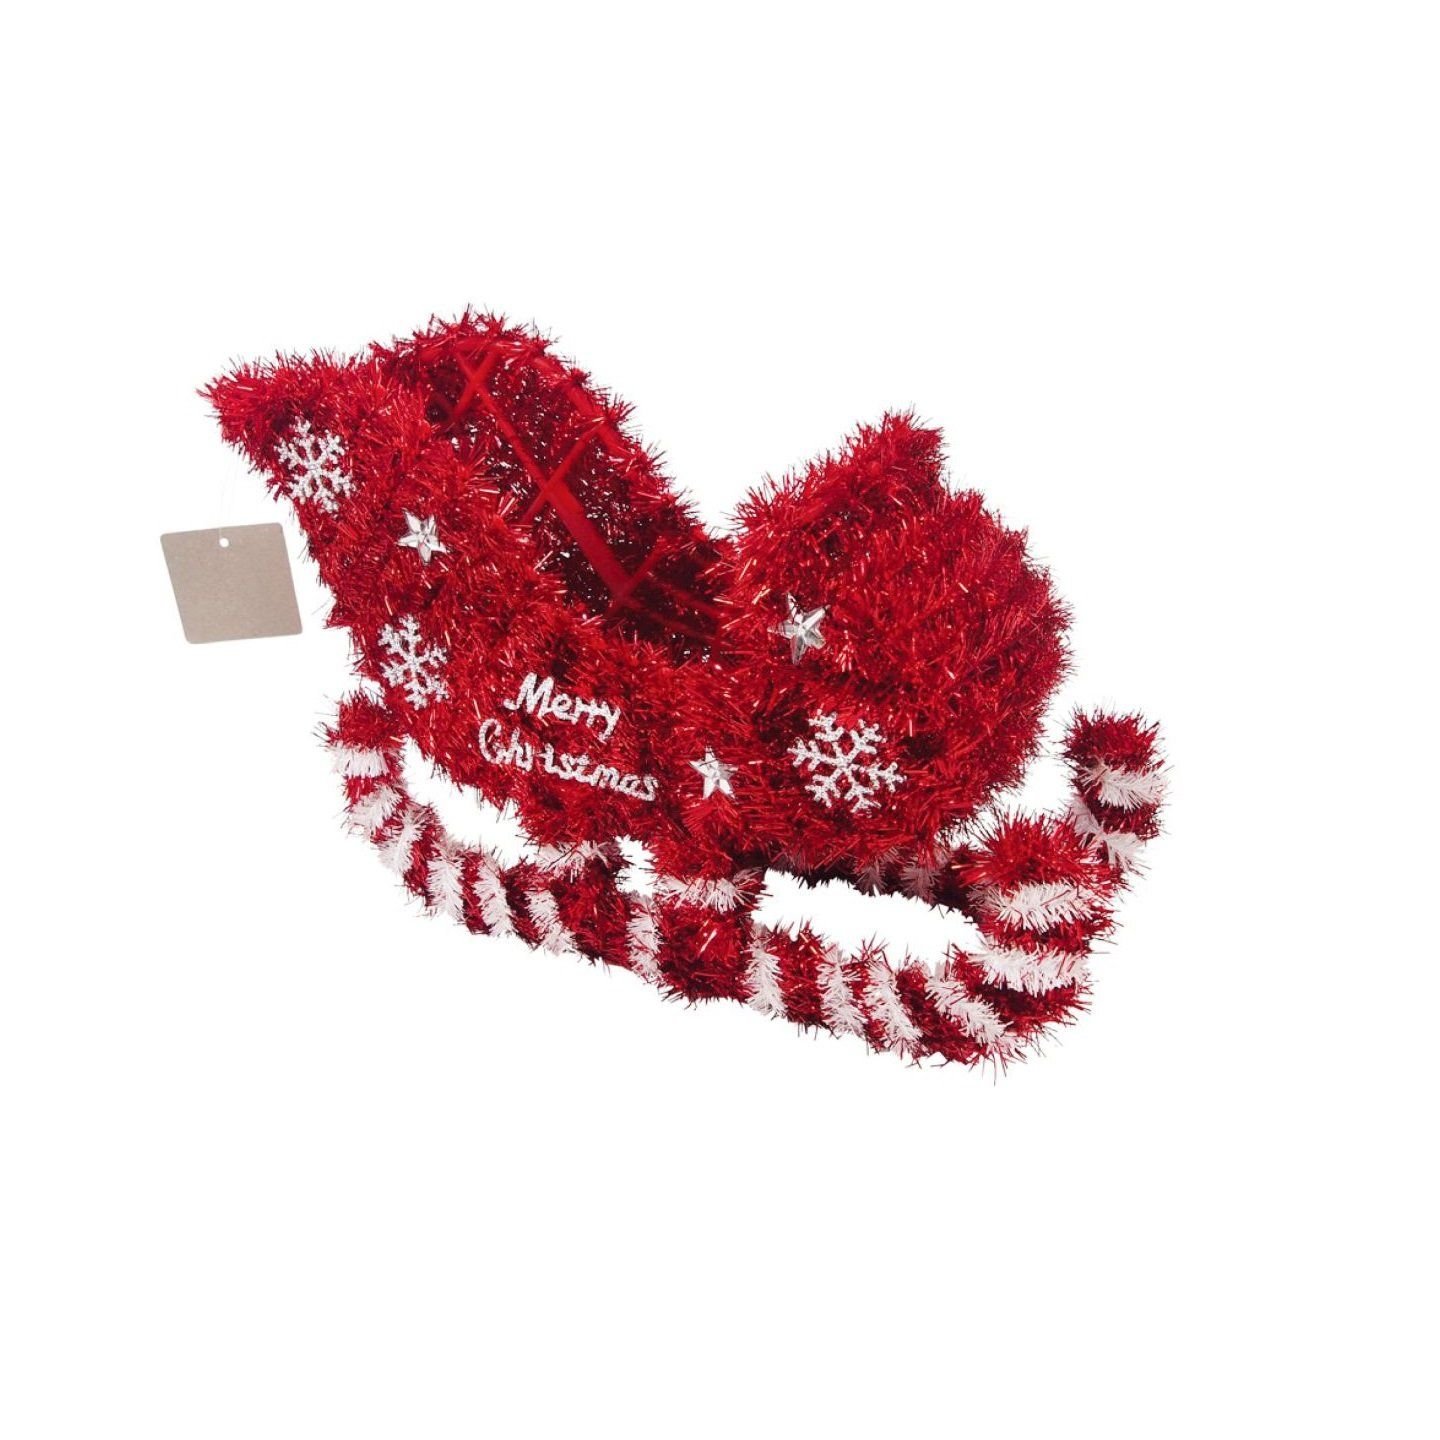 Tinsel Sleigh 32.5x23.5cm with Deco Uncle Bills XB0899